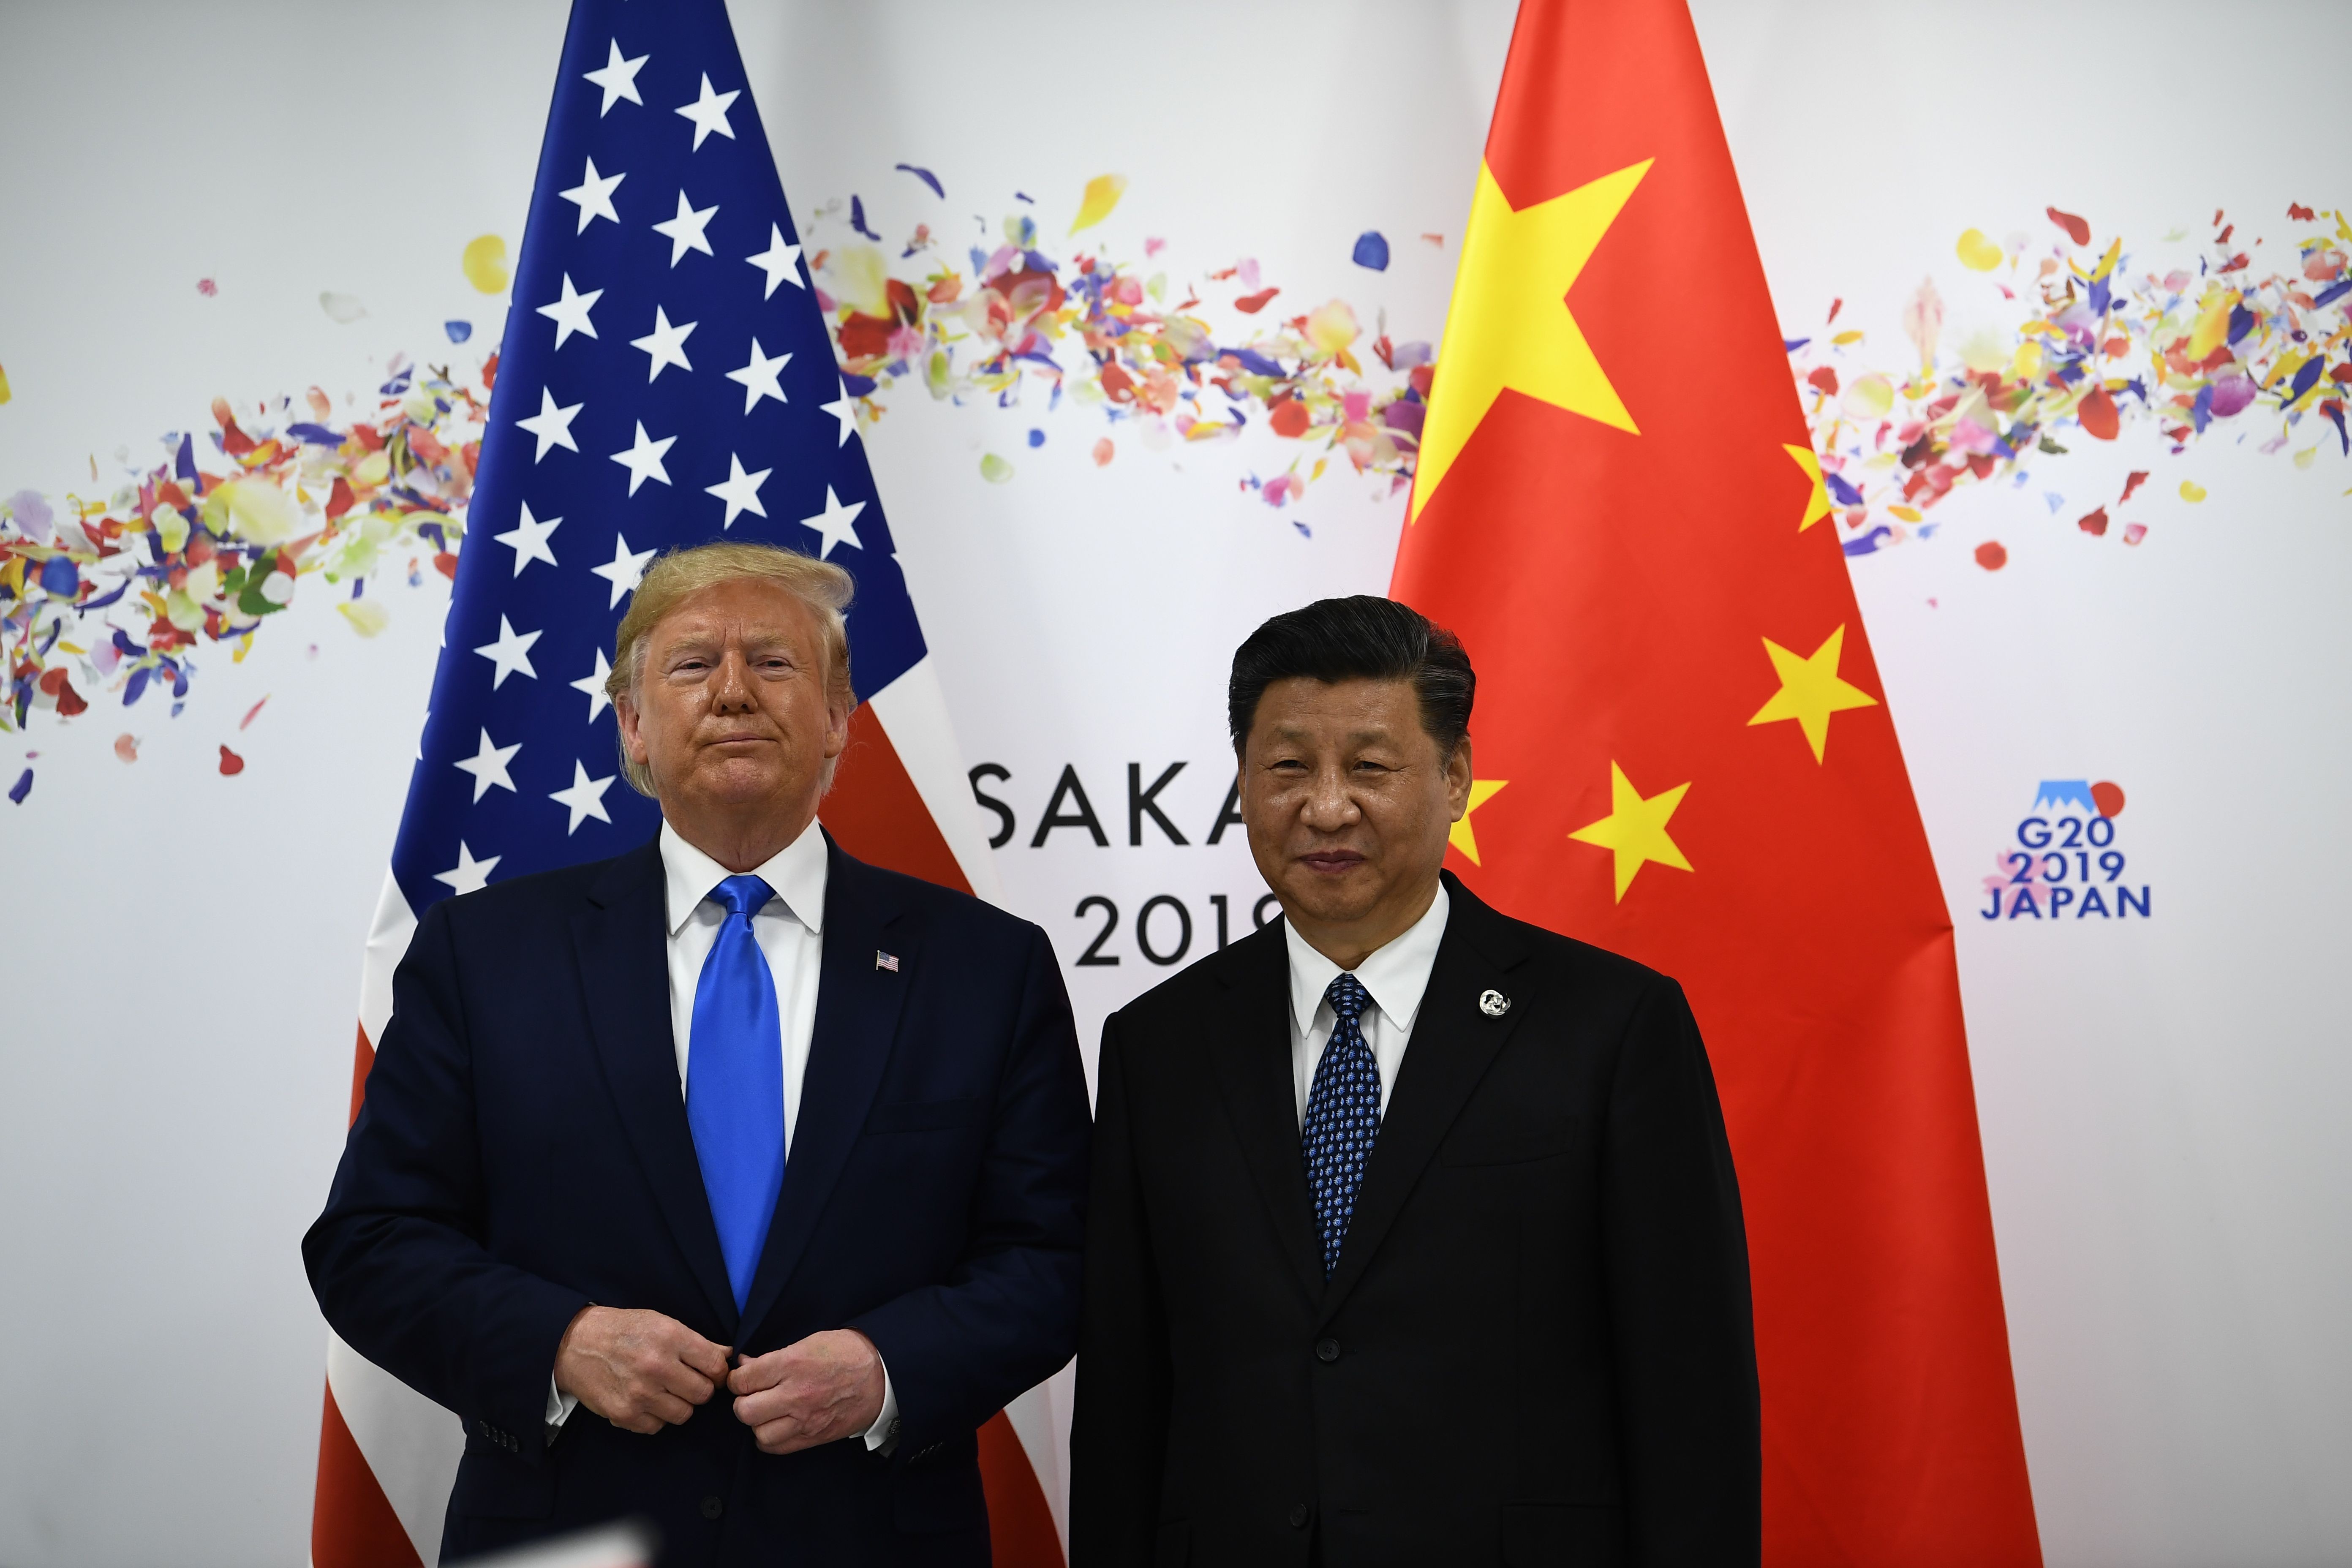 US President Donald Trump and Chinese President Xi Jinping attend their bilateral meeting on the sidelines of the G20 Summit in Osaka in June last year. Photo: AFP